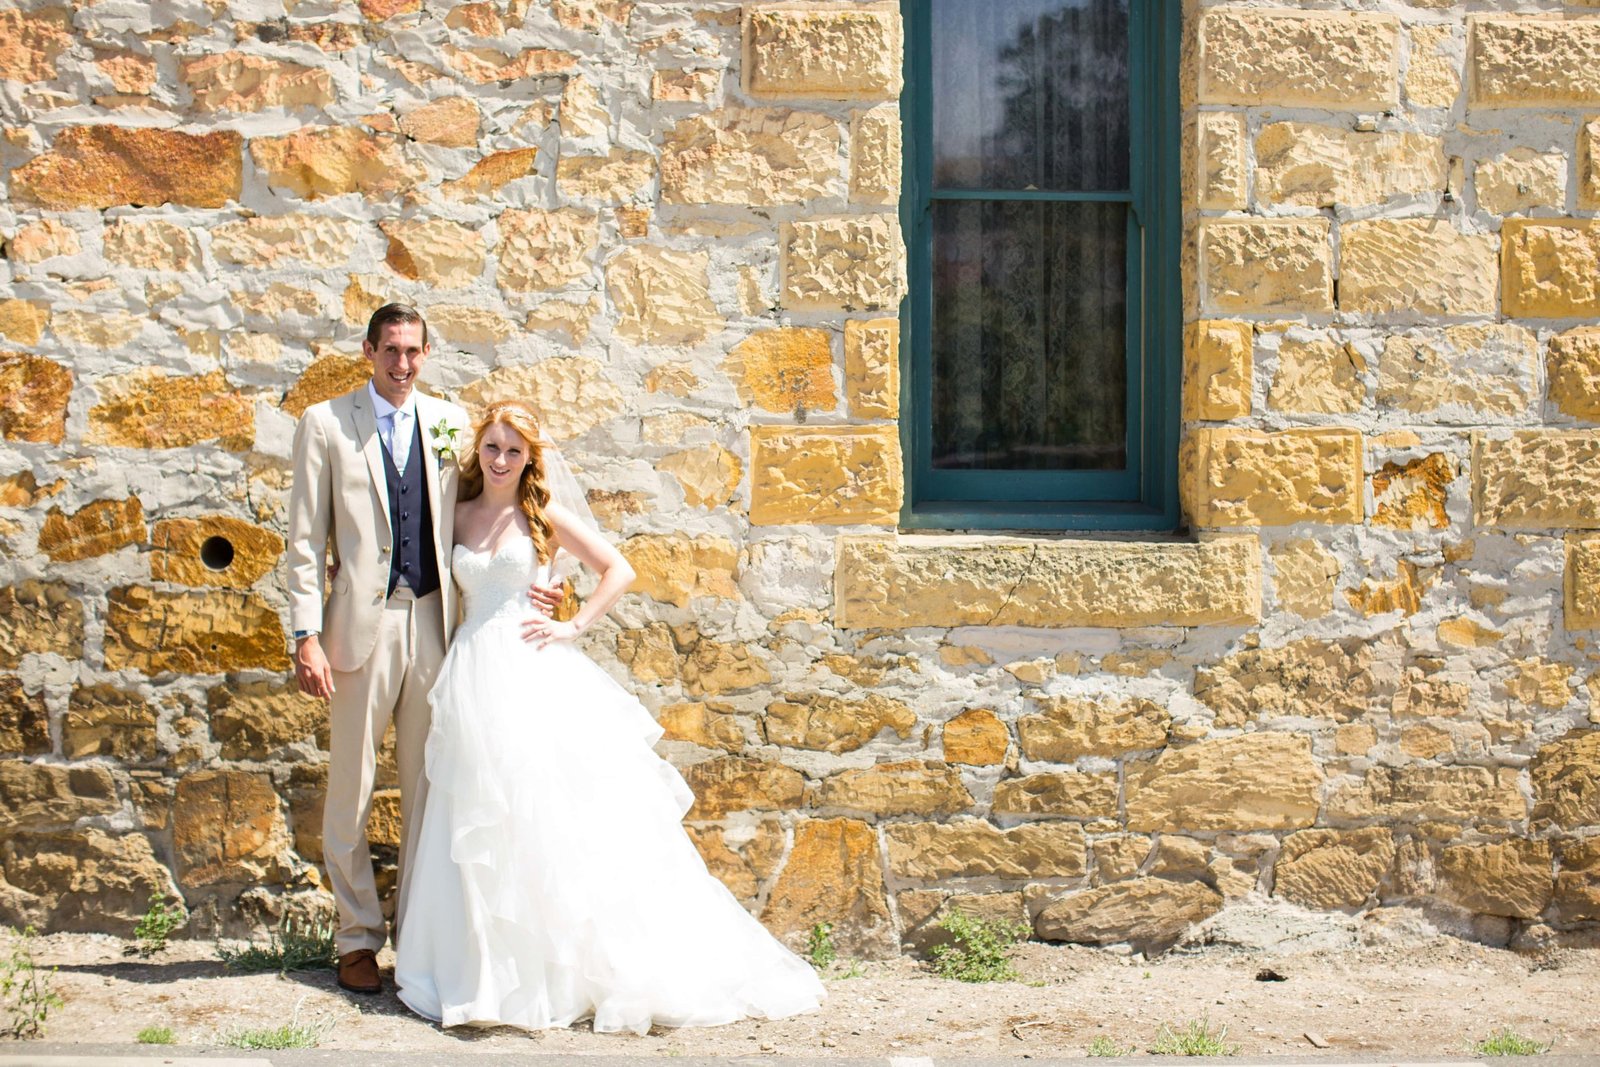 Bride and groom pose for a portrait in front of a stone wall at Heritage House in Arroyo Grande